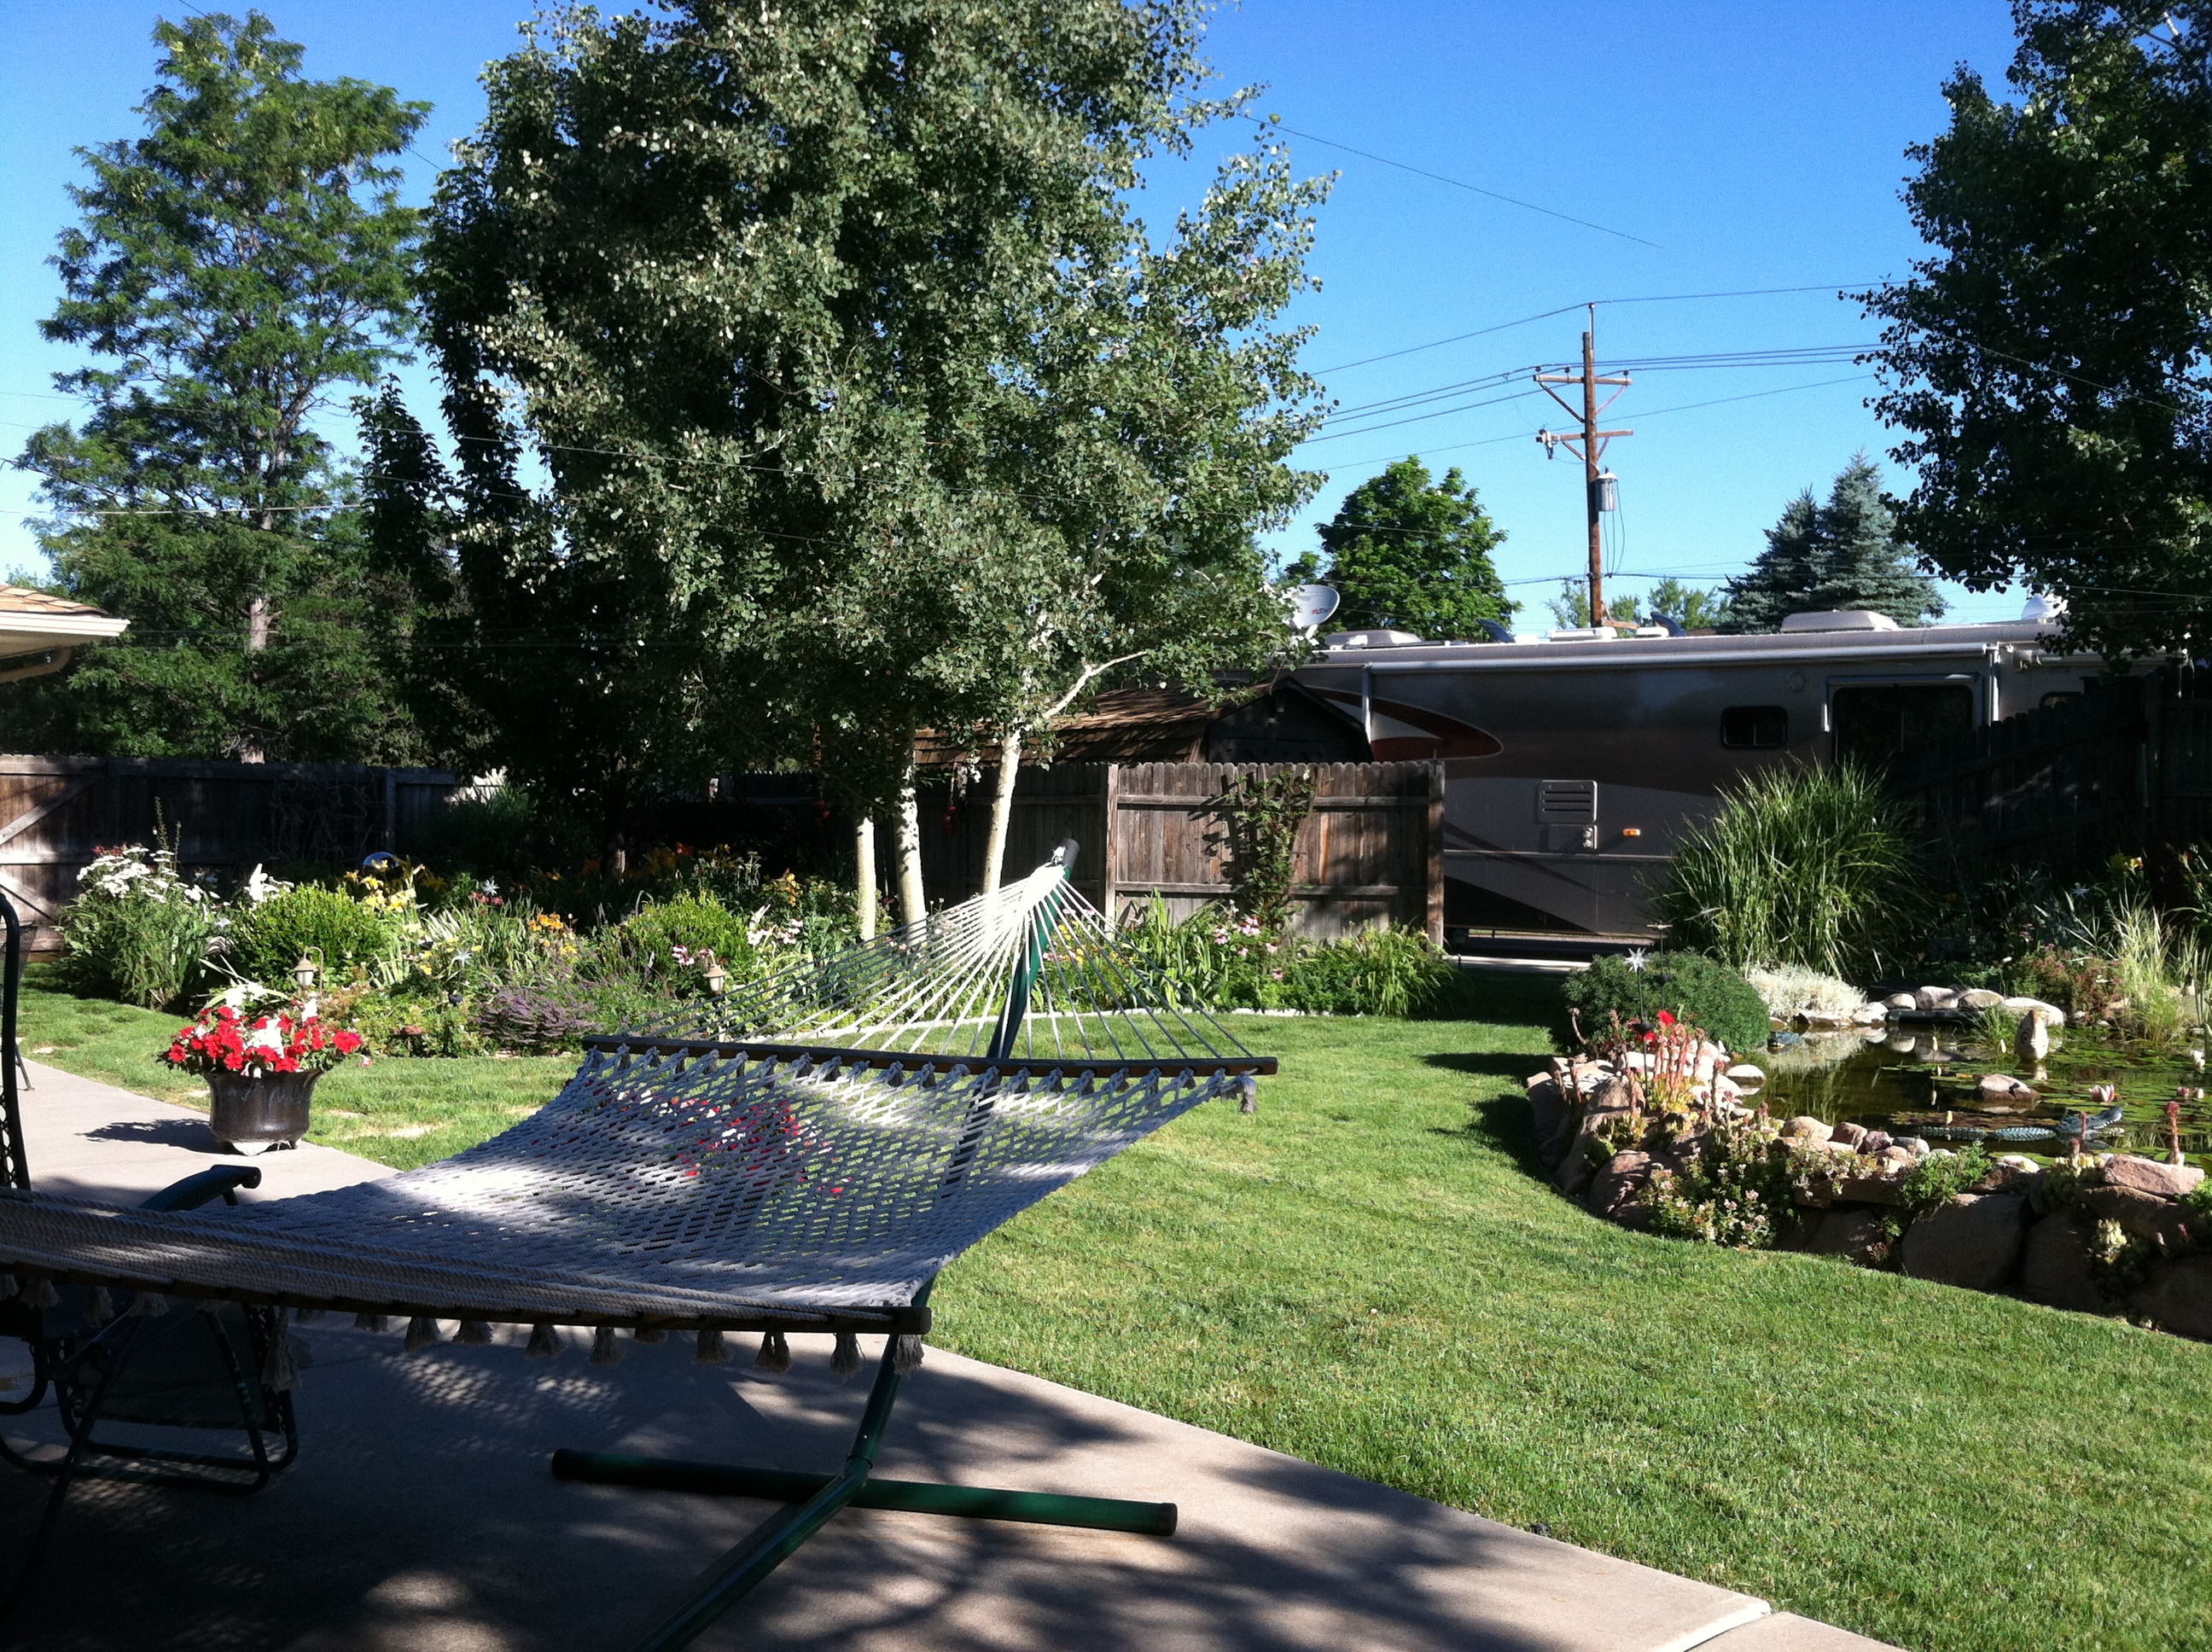 Bed & Breakfast 10 Minutes from Downtown Denver - TravelTHC